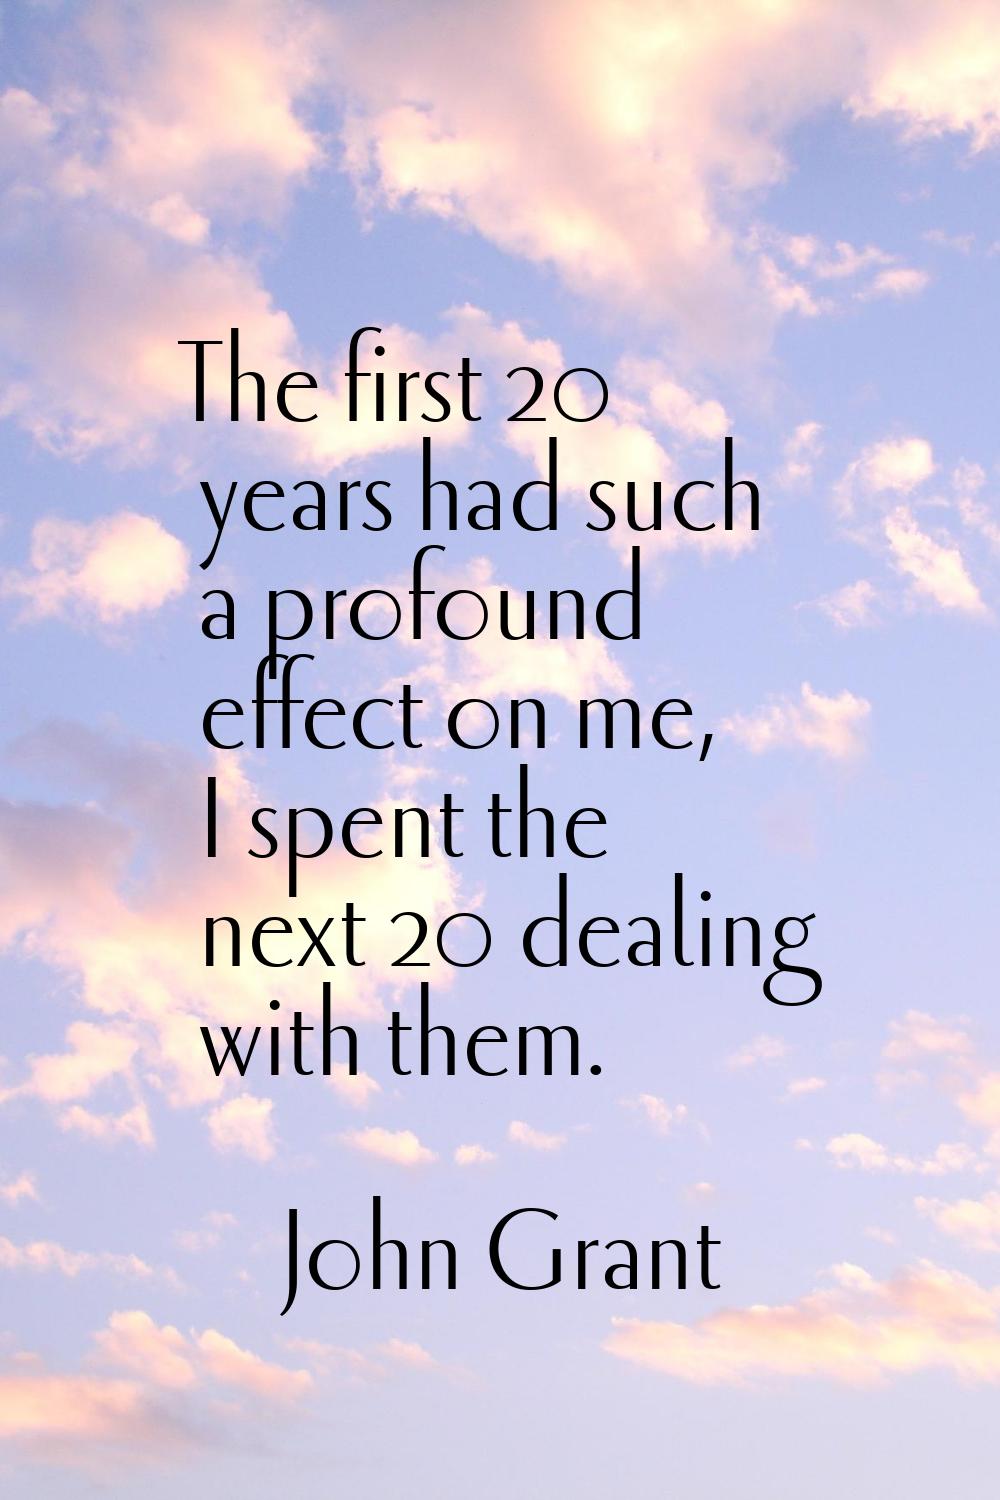 The first 20 years had such a profound effect on me, I spent the next 20 dealing with them.